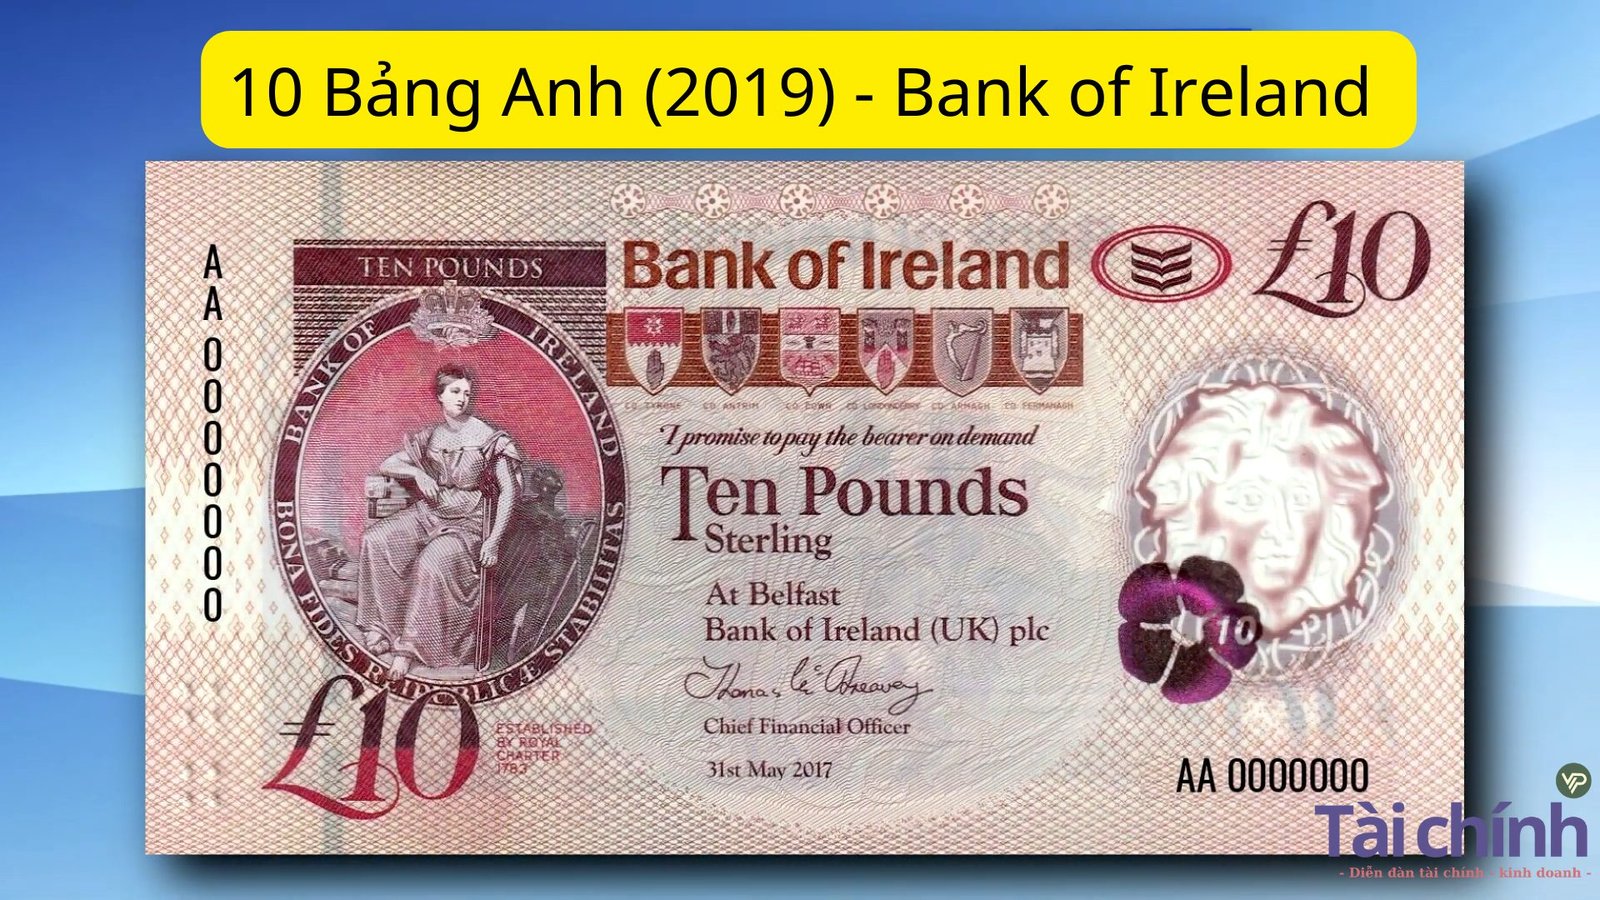 10 Bảng Anh (2019) - Bank of Ireland